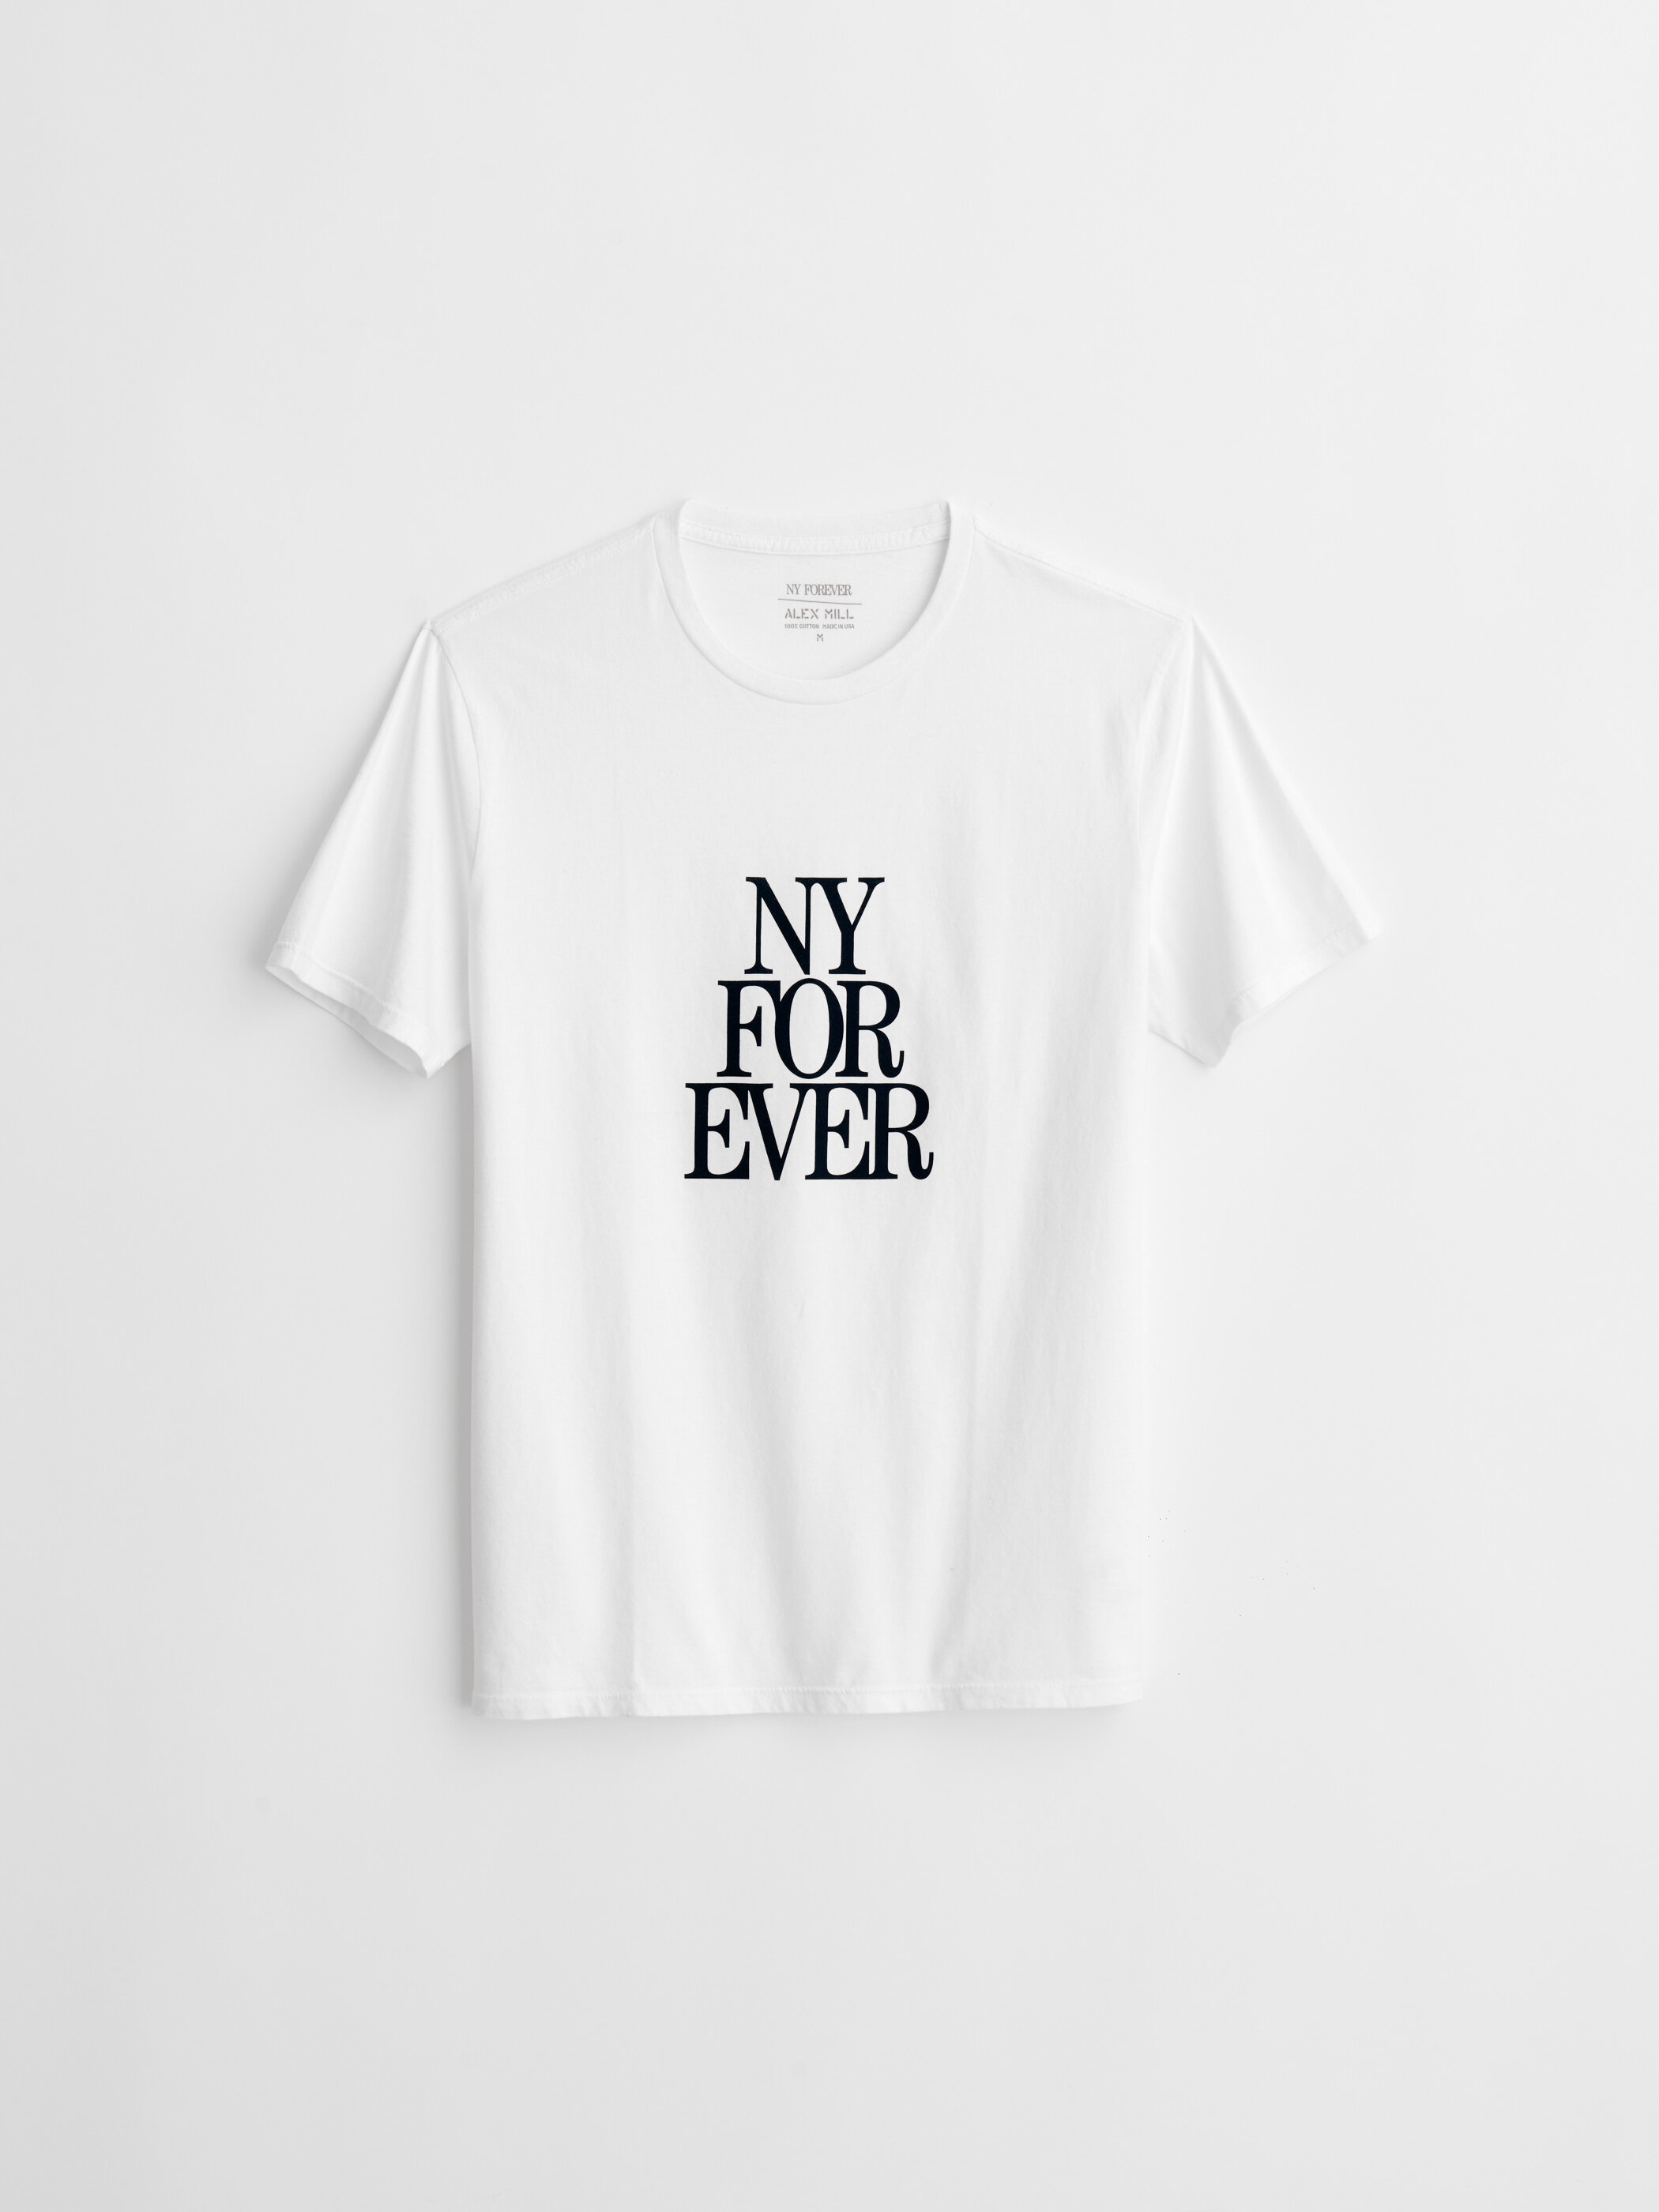 The Wild Collective Knicks NY Forever Band T-Shirt